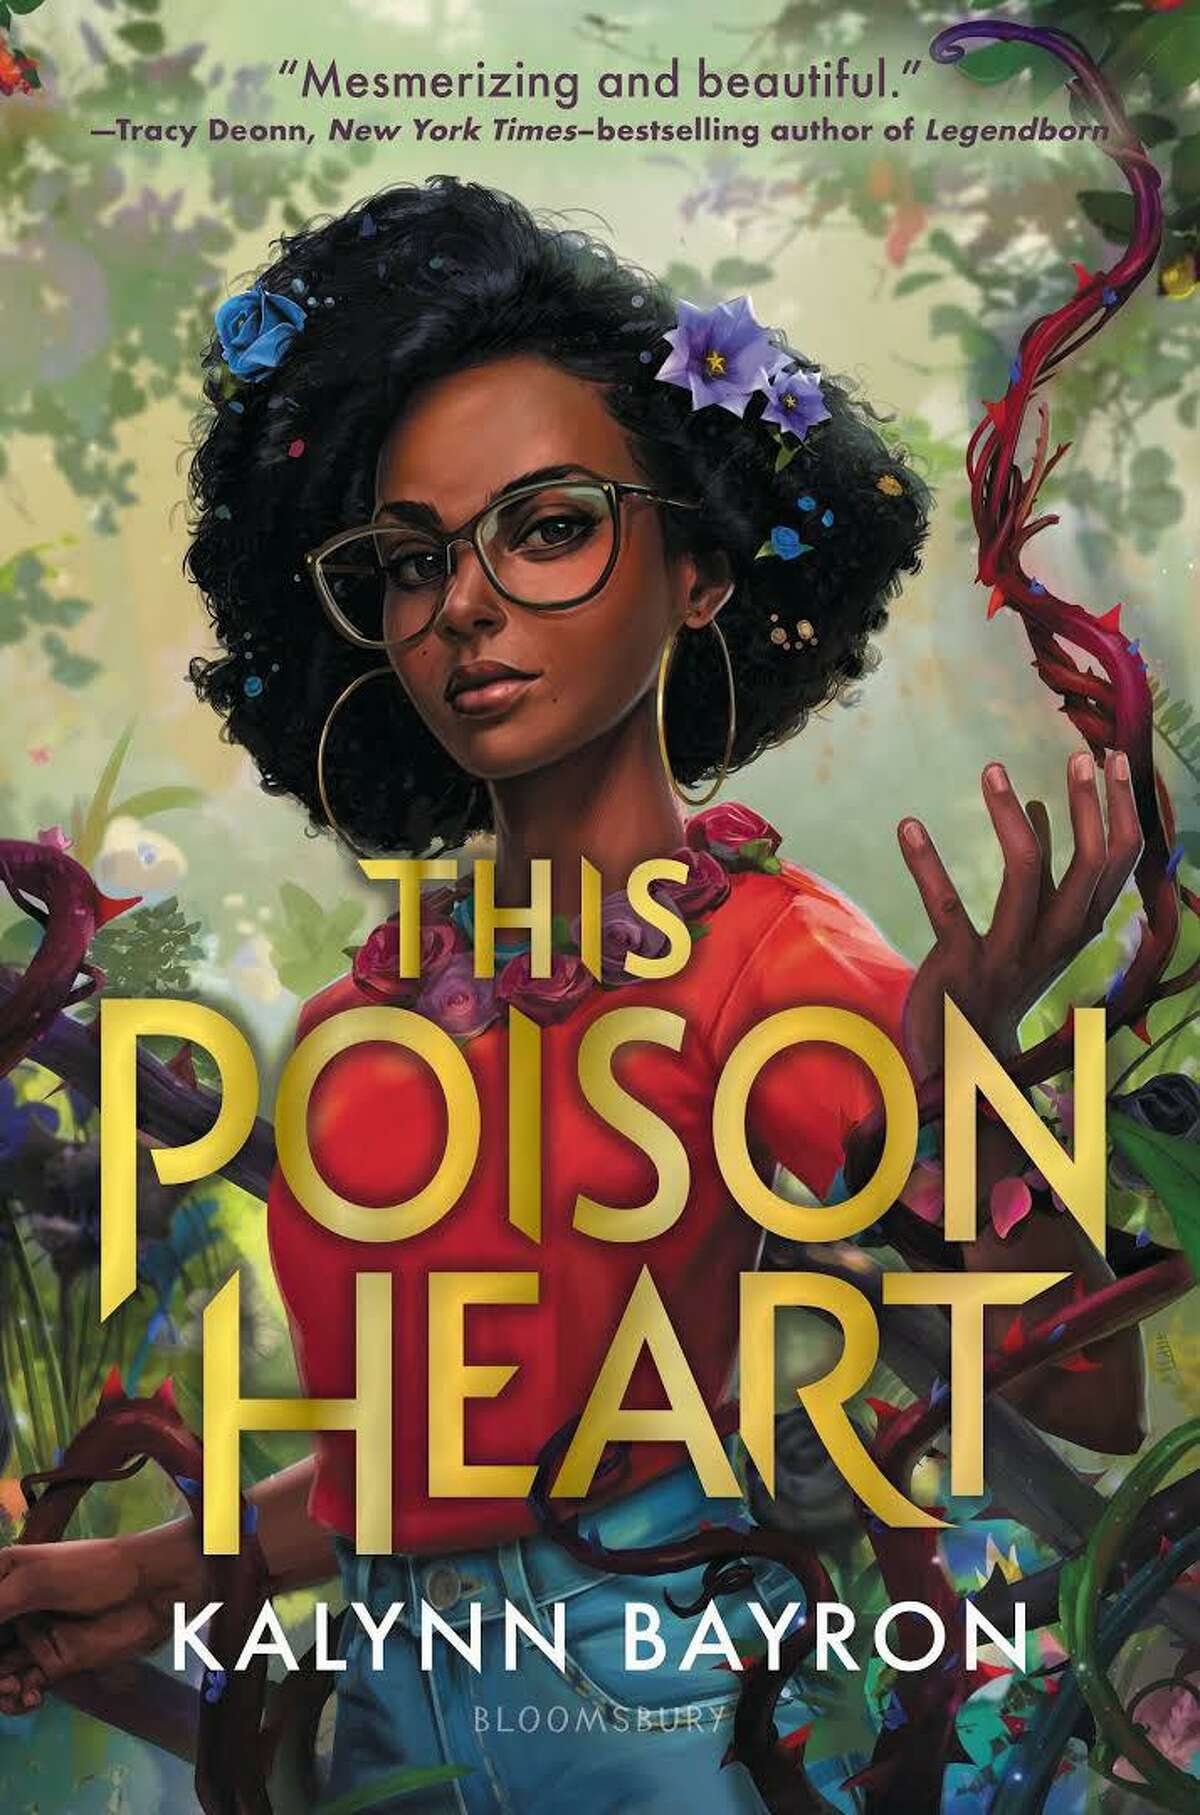 San Antonio writer Kalynn Bayron's latest YA novel, “This Poison Heart,” is about a teenager with mysterious botanical abilities.